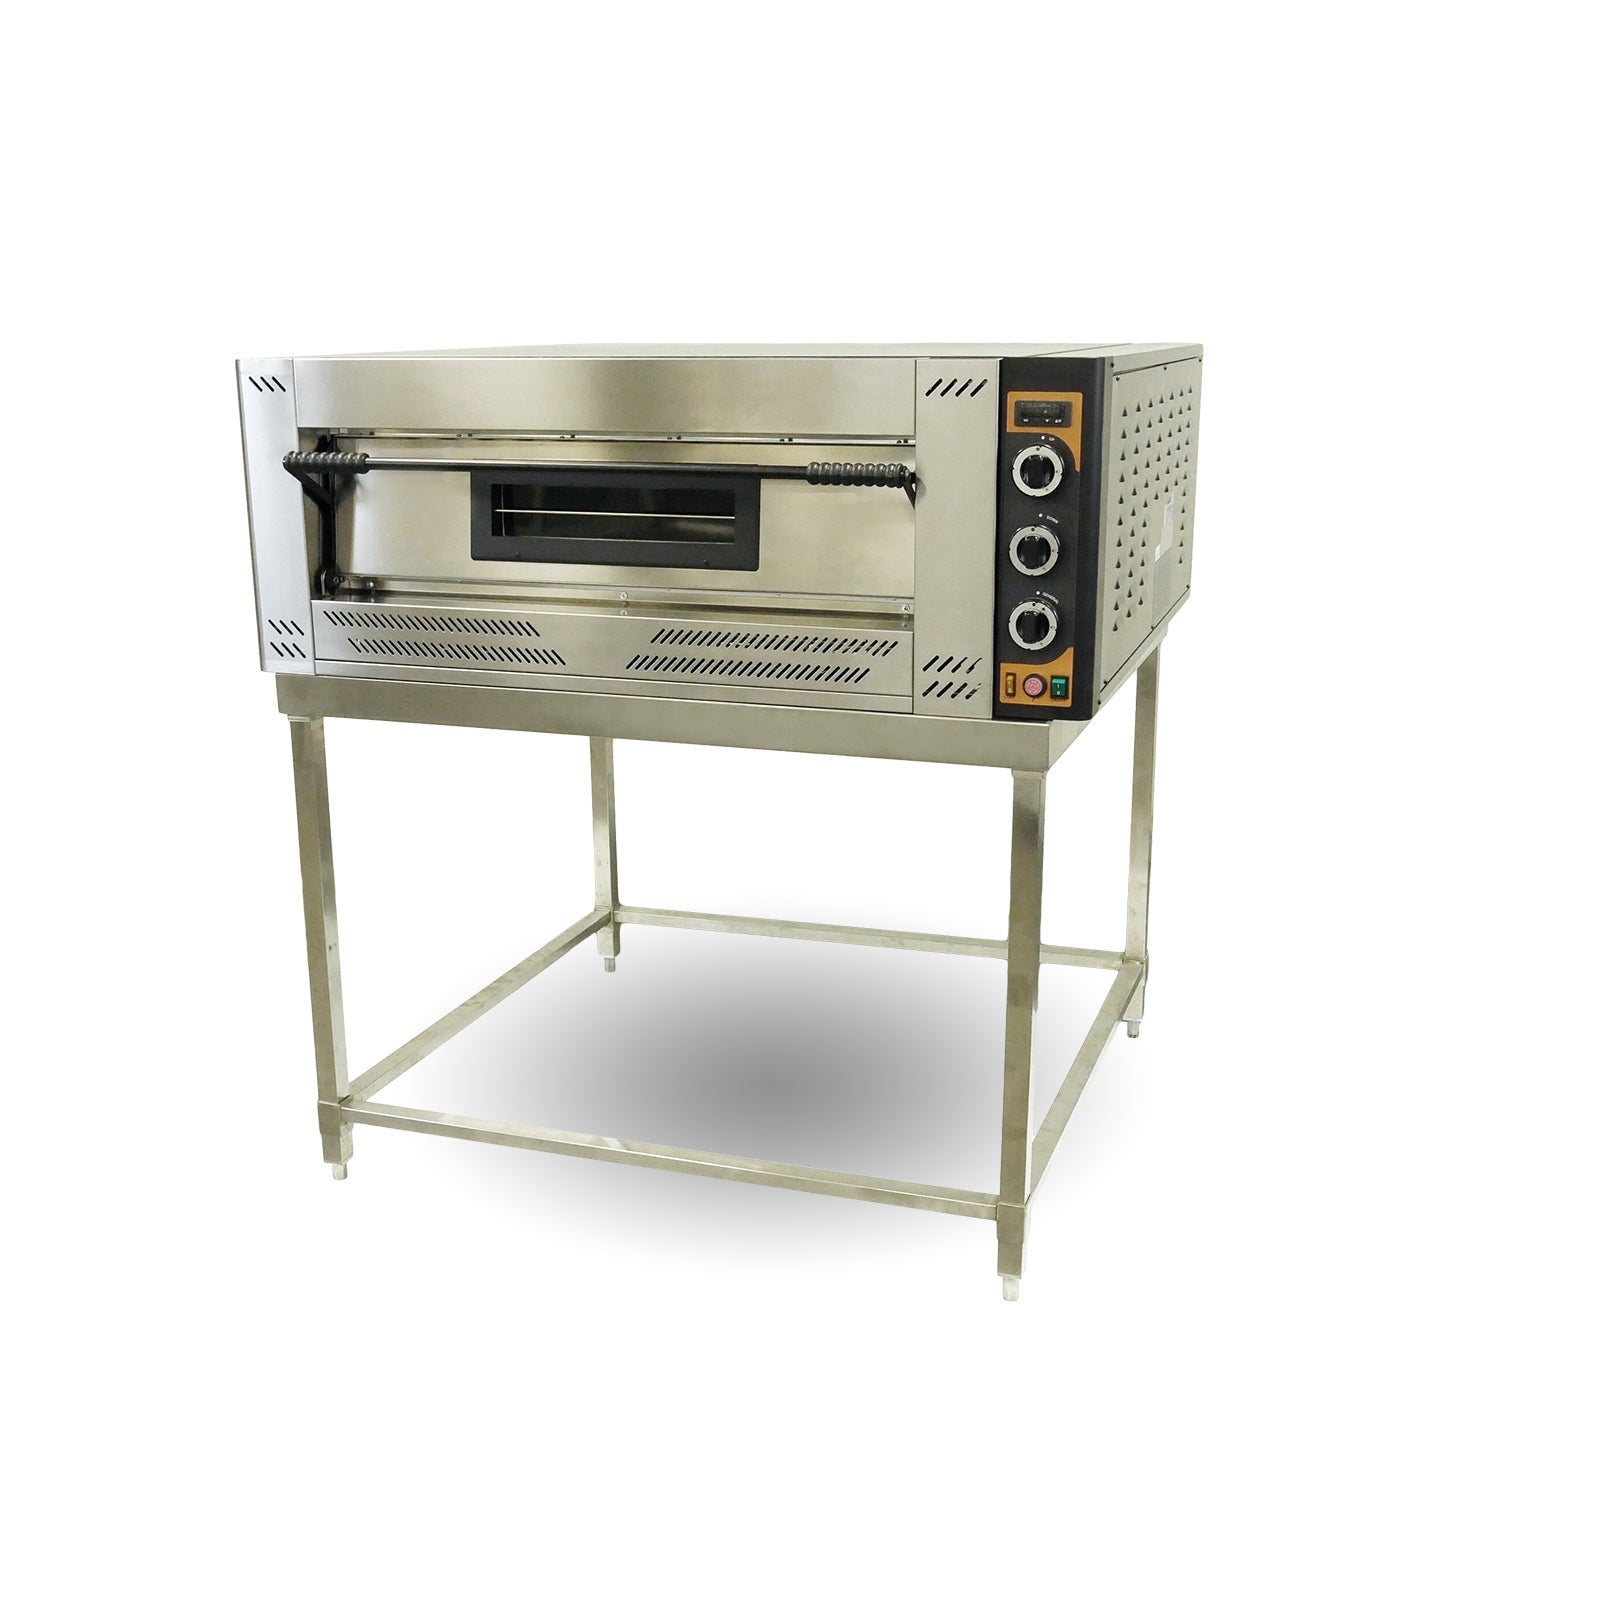 Bakermax Prisma Food Single Deck Gas Pizza&Bakery Ovens PMG-9 Pizza & Deck Ovens